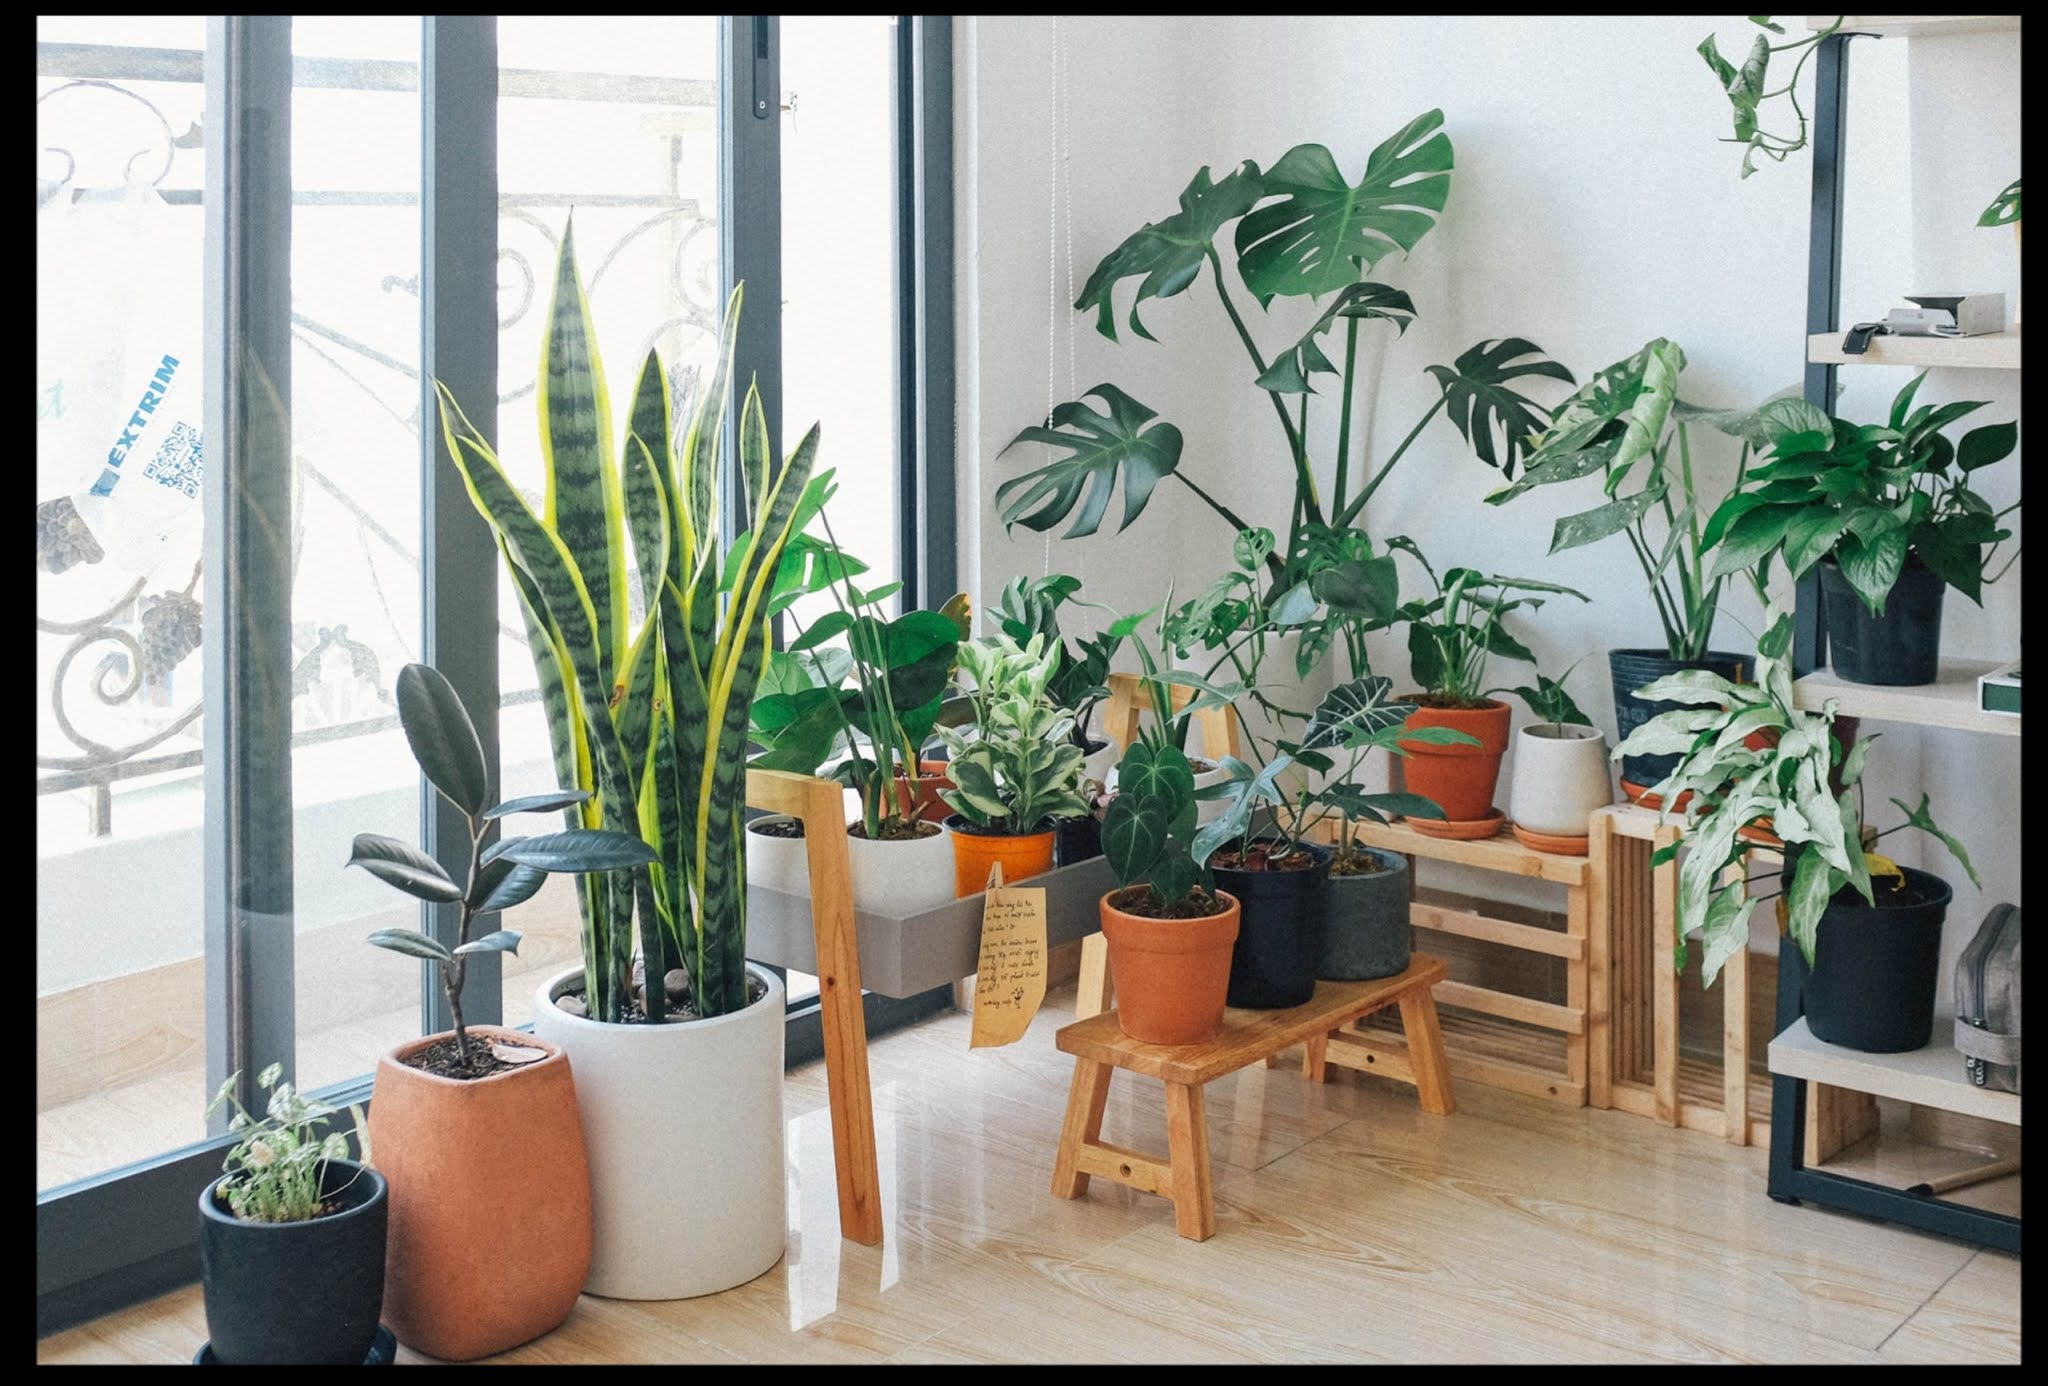 Keep10 great indoor plants to make the house green and healthy,Large indoor plants,Indoor plants names and pictures,Favorite indoor plants,Best indoor plants,   Small indoor plants,   Types of indoor plants,     Air purifying indoor plants,    Indoor plants online,